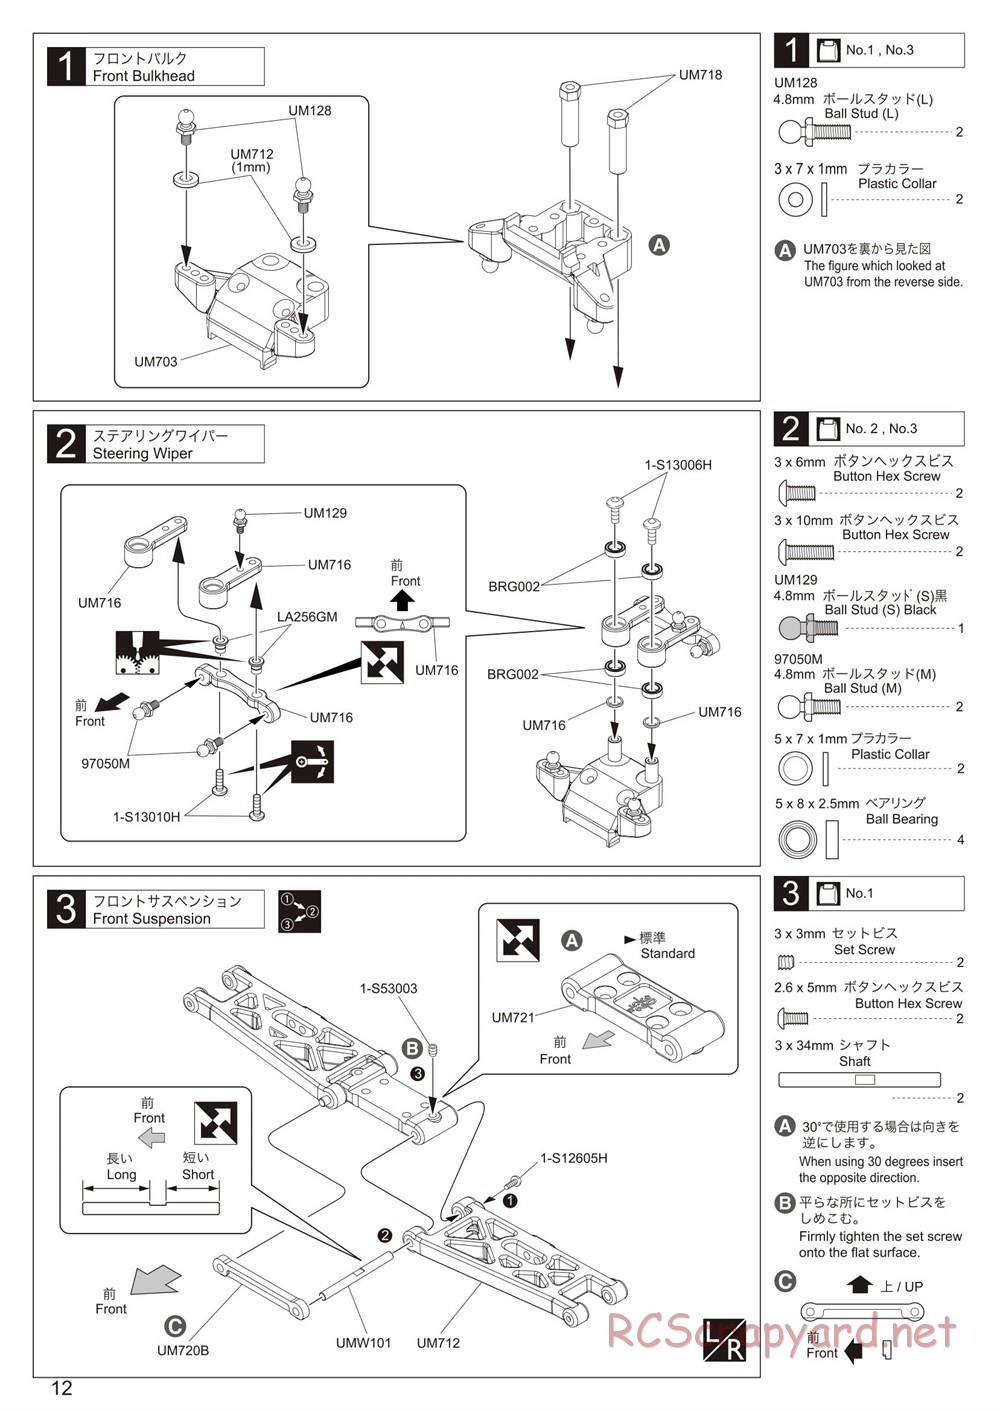 Kyosho - Ultima RB6 (2015) - Manual - Page 12